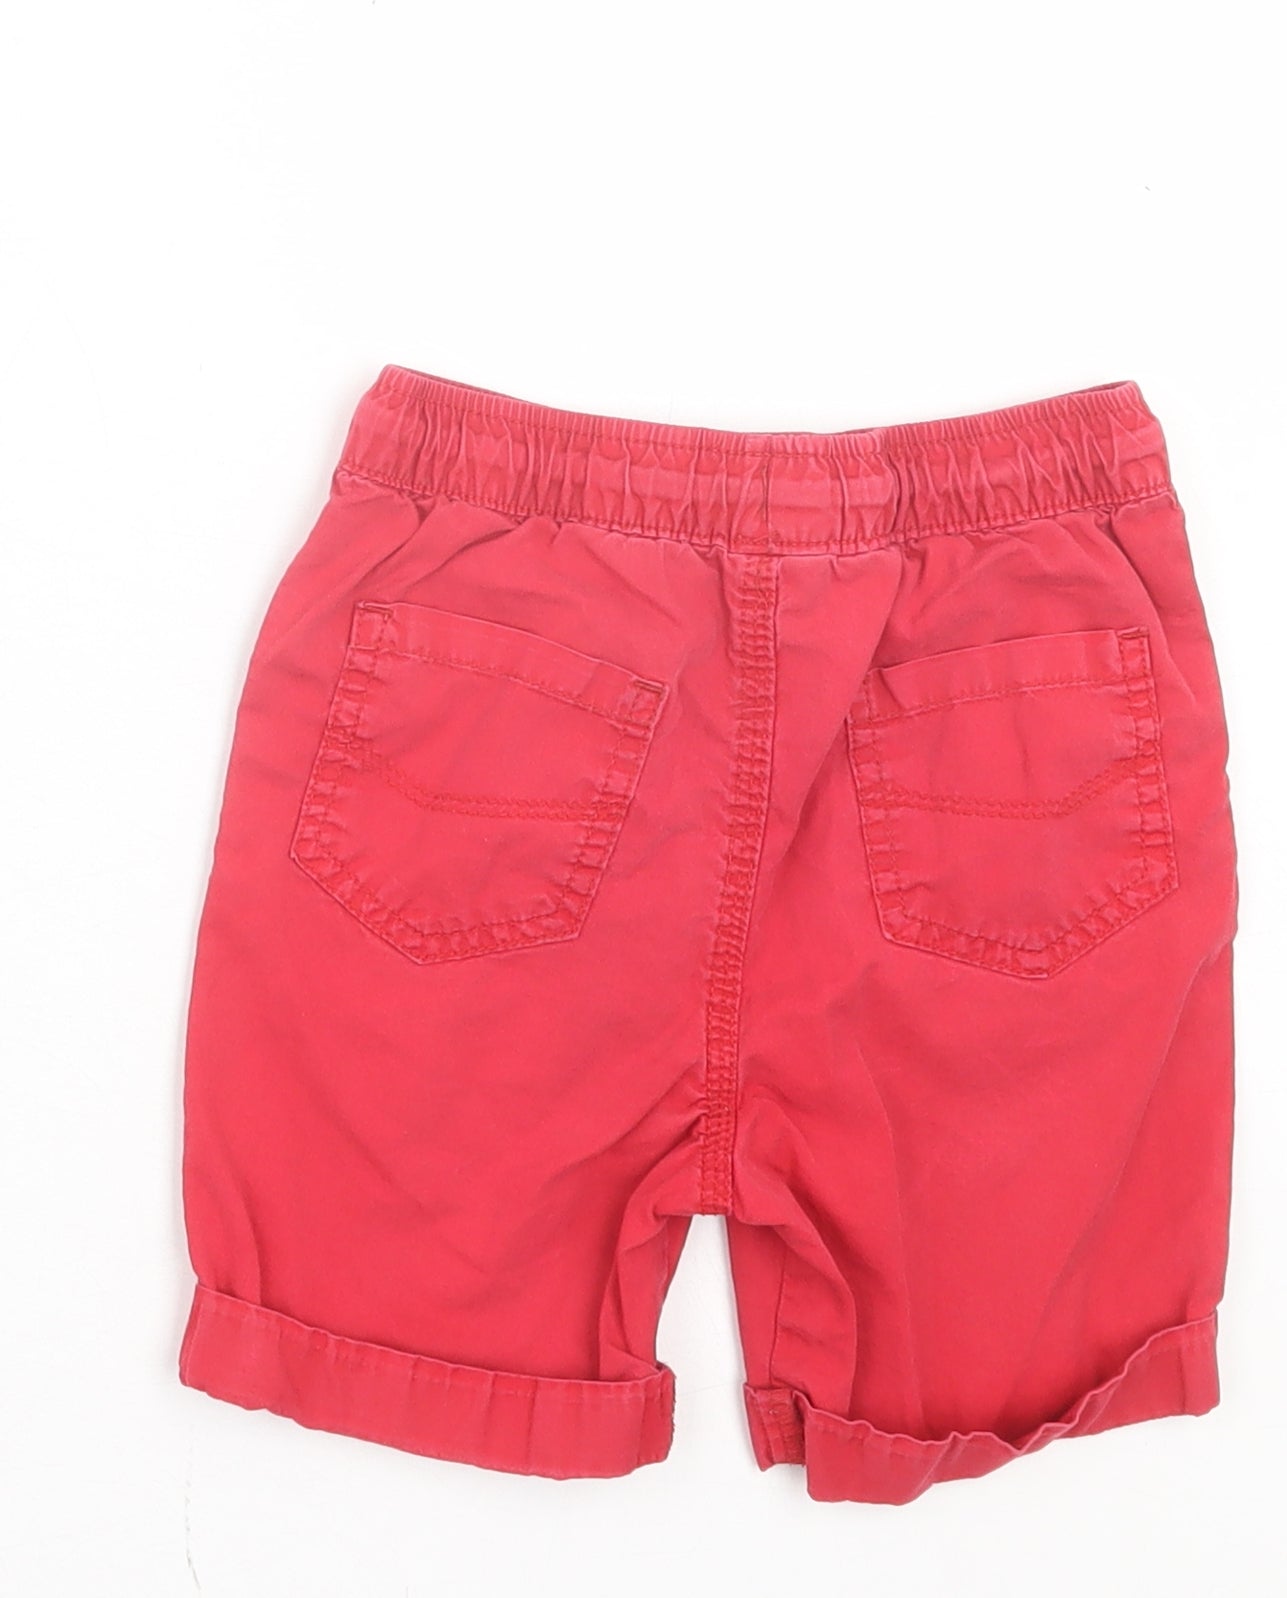 George Boys Red Cotton Cropped Trousers Size 2-3 Years Regular Drawstring - Shorts